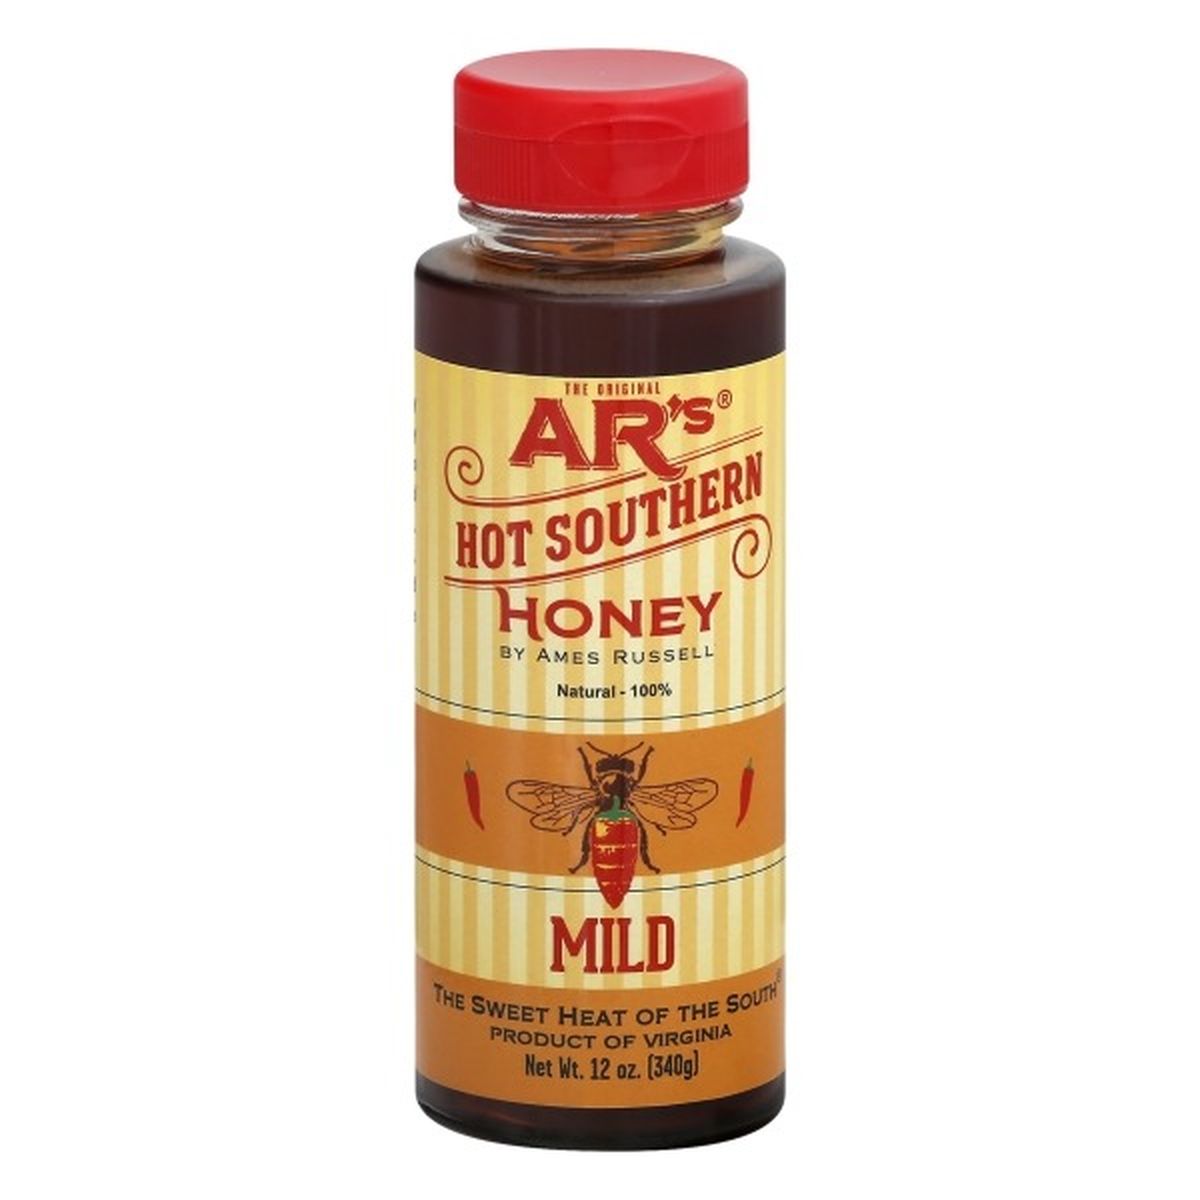 Calories in ARs Honey, Hot Southern, Mild